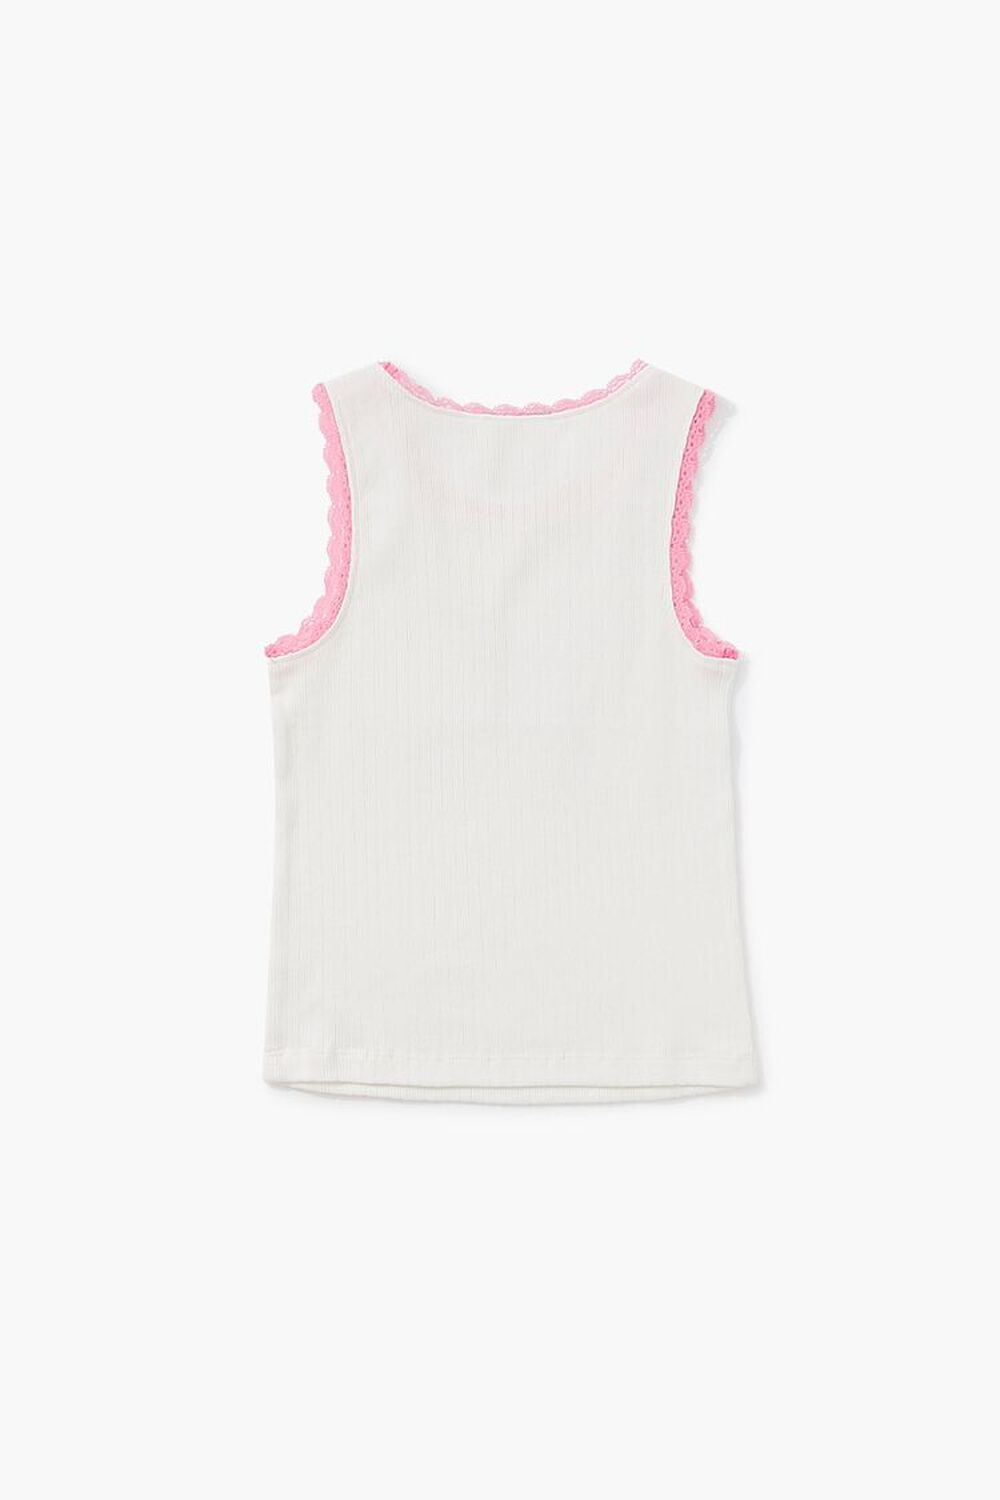 CREAM/MULTI Girls Butterfly Graphic Tank Top (Kids), image 2